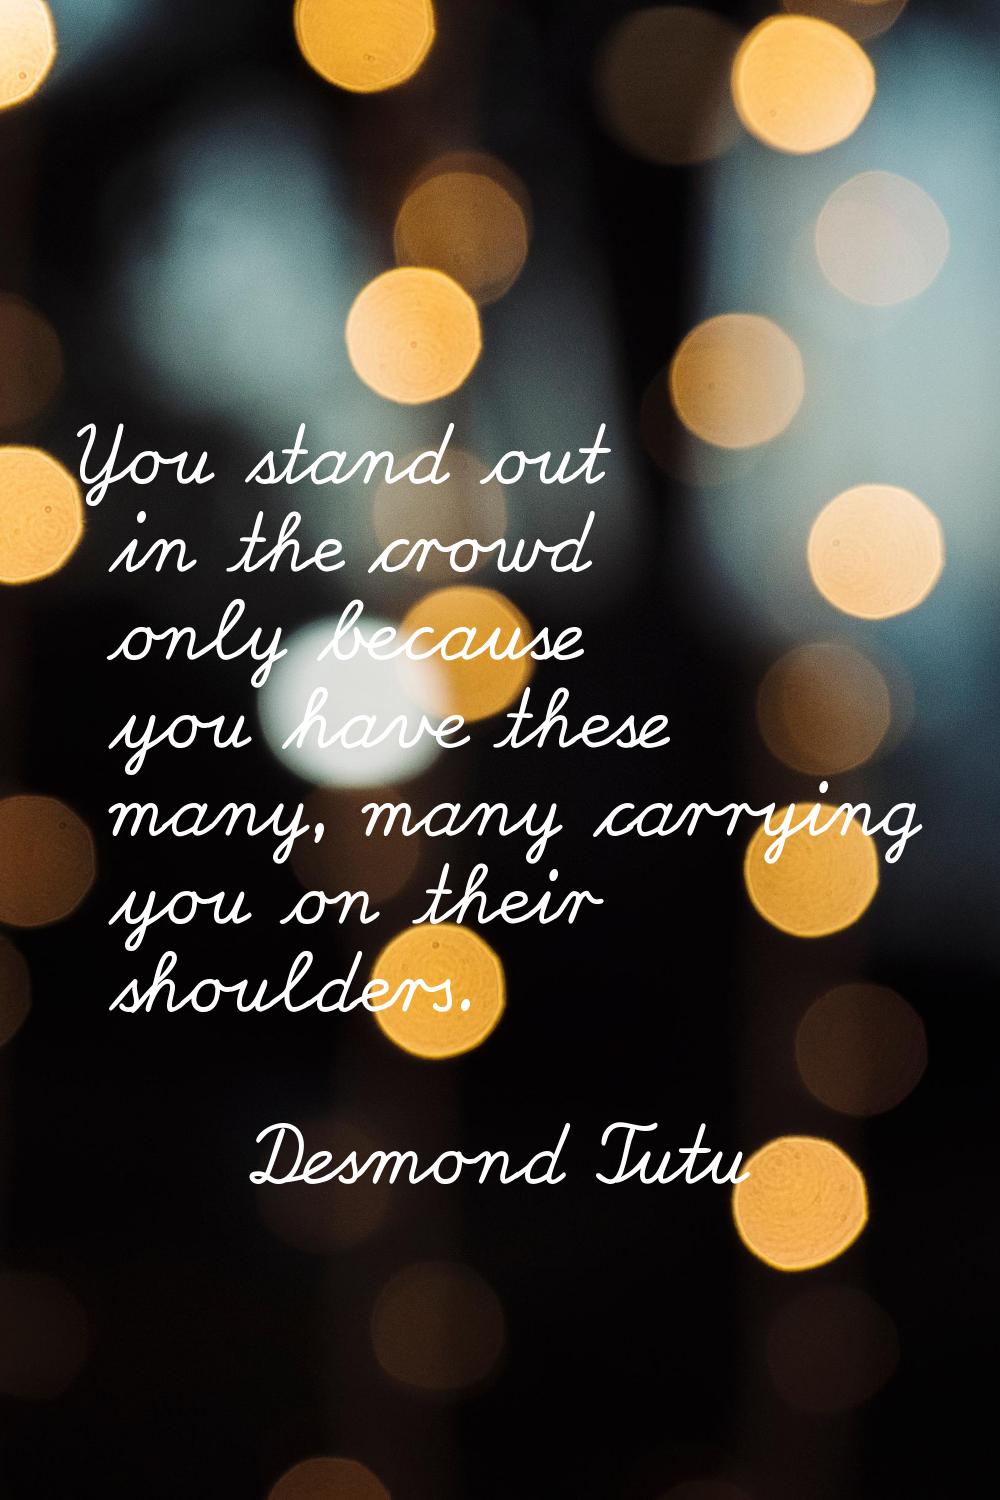 You stand out in the crowd only because you have these many, many carrying you on their shoulders.